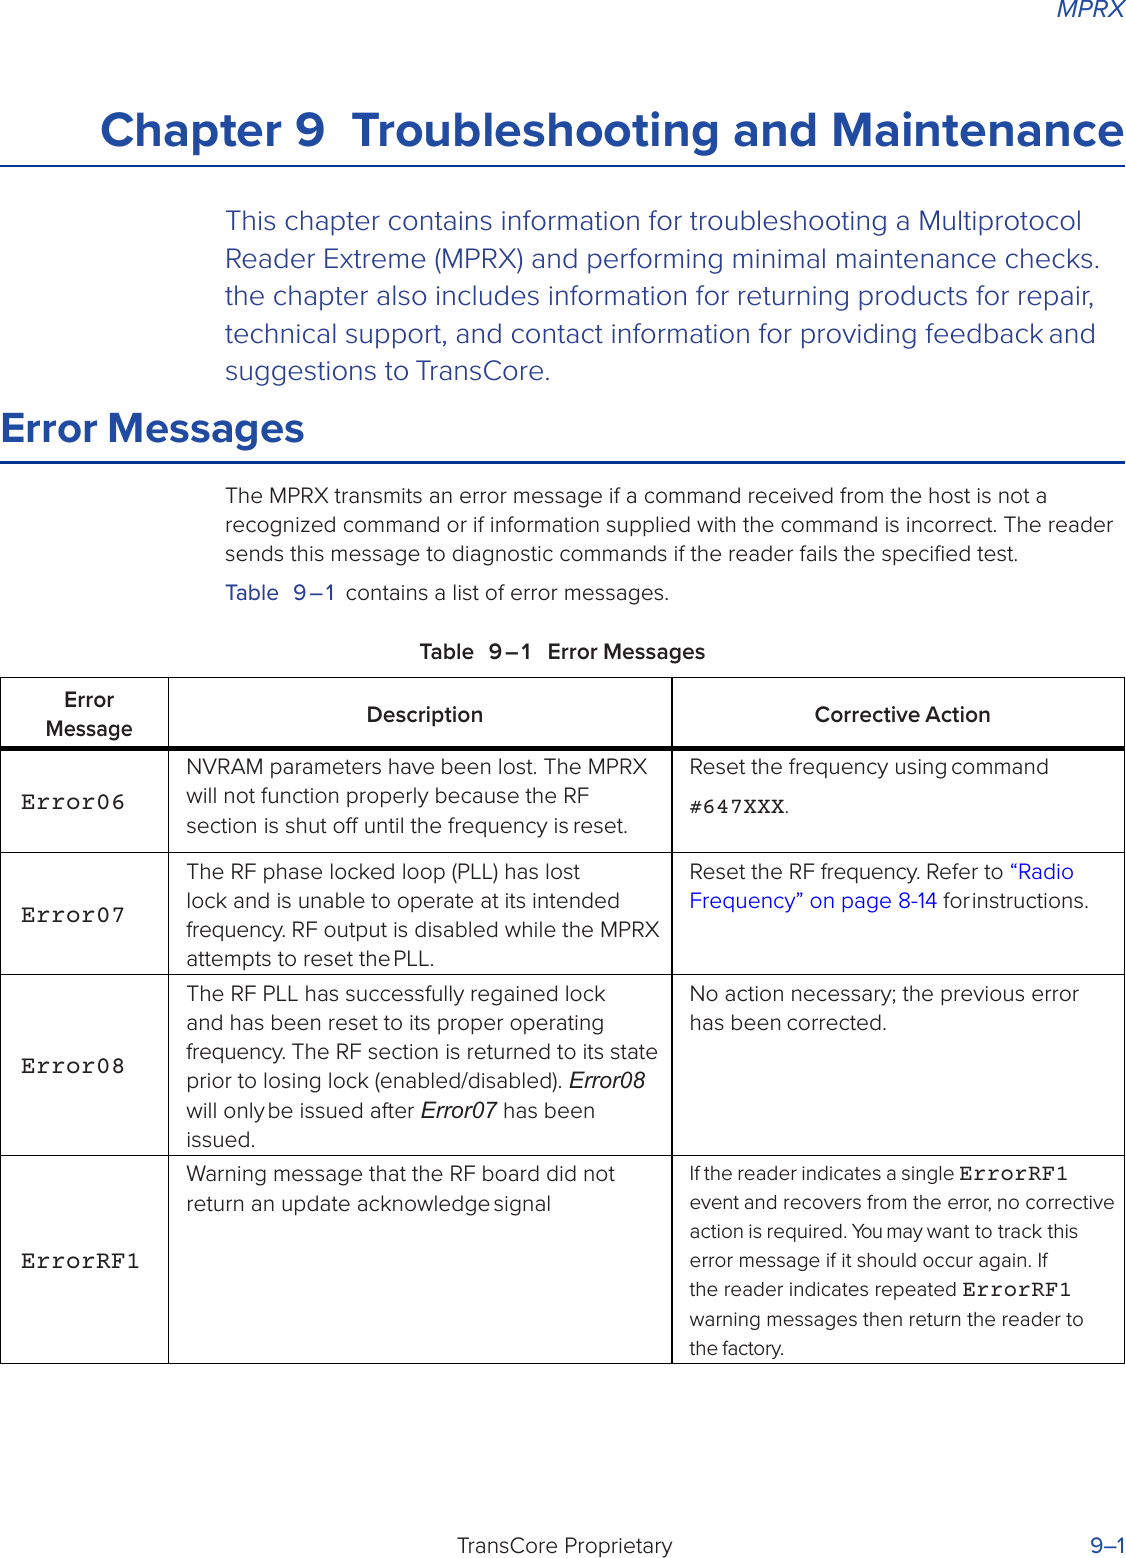 MPRXTransCore Proprietary 9–1 Chapter 9  Troubleshooting and MaintenanceThis chapter contains information for troubleshooting a Multiprotocol Reader Extreme (MPRX) and performing minimal maintenance checks. the chapter also includes information for returning products for repair, technical support, and contact information for providing feedback and suggestions to TransCore.Error MessagesThe MPRX transmits an error message if a command received from the host is not a recognized command or if information supplied with the command is incorrect. The reader sends this message to diagnostic commands if the reader fails the speciﬁed test.Table 9 – 1  contains a list of error messages.Table 9 – 1  Error MessagesError MessageDescription Corrective ActionError06NVRAM parameters have been lost. The MPRX will not function properly because the RF section is shut o until the frequency is reset.Reset the frequency using command#647XXX.Error07The RF phase locked loop (PLL) has lost lock and is unable to operate at its intended frequency. RF output is disabled while the MPRX attempts to reset the PLL.Reset the RF frequency. Refer to “Radio Frequency” on page 8-14 for instructions.Error08The RF PLL has successfully regained lock and has been reset to its proper operating frequency. The RF section is returned to its state prior to losing lock (enabled/disabled). Error08 will only be issued after Error07 has been issued.No action necessary; the previous error has been corrected.ErrorRF1Warning message that the RF board did not return an update acknowledge signalIf the reader indicates a single ErrorRF1 event and recovers from the error, no corrective action is required. You may want to track this error message if it should occur again. If the reader indicates repeated ErrorRF1 warning messages then return the reader to the factory.